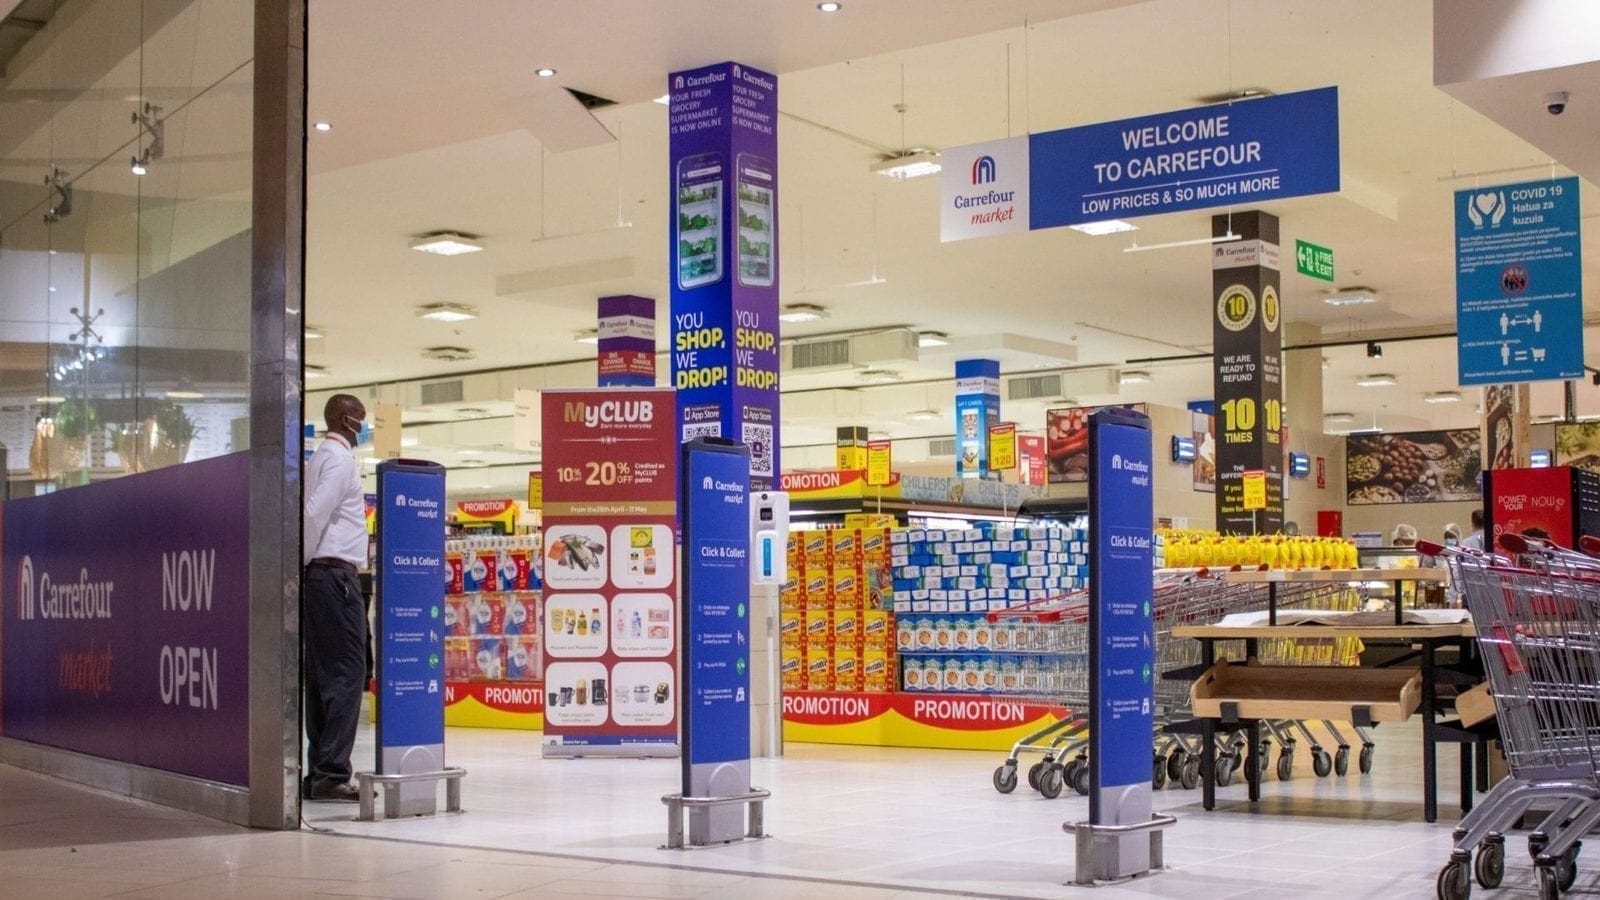 Carrefour Kenya takes over Shoprite’s space at Garden City mall, opens 13th outlet